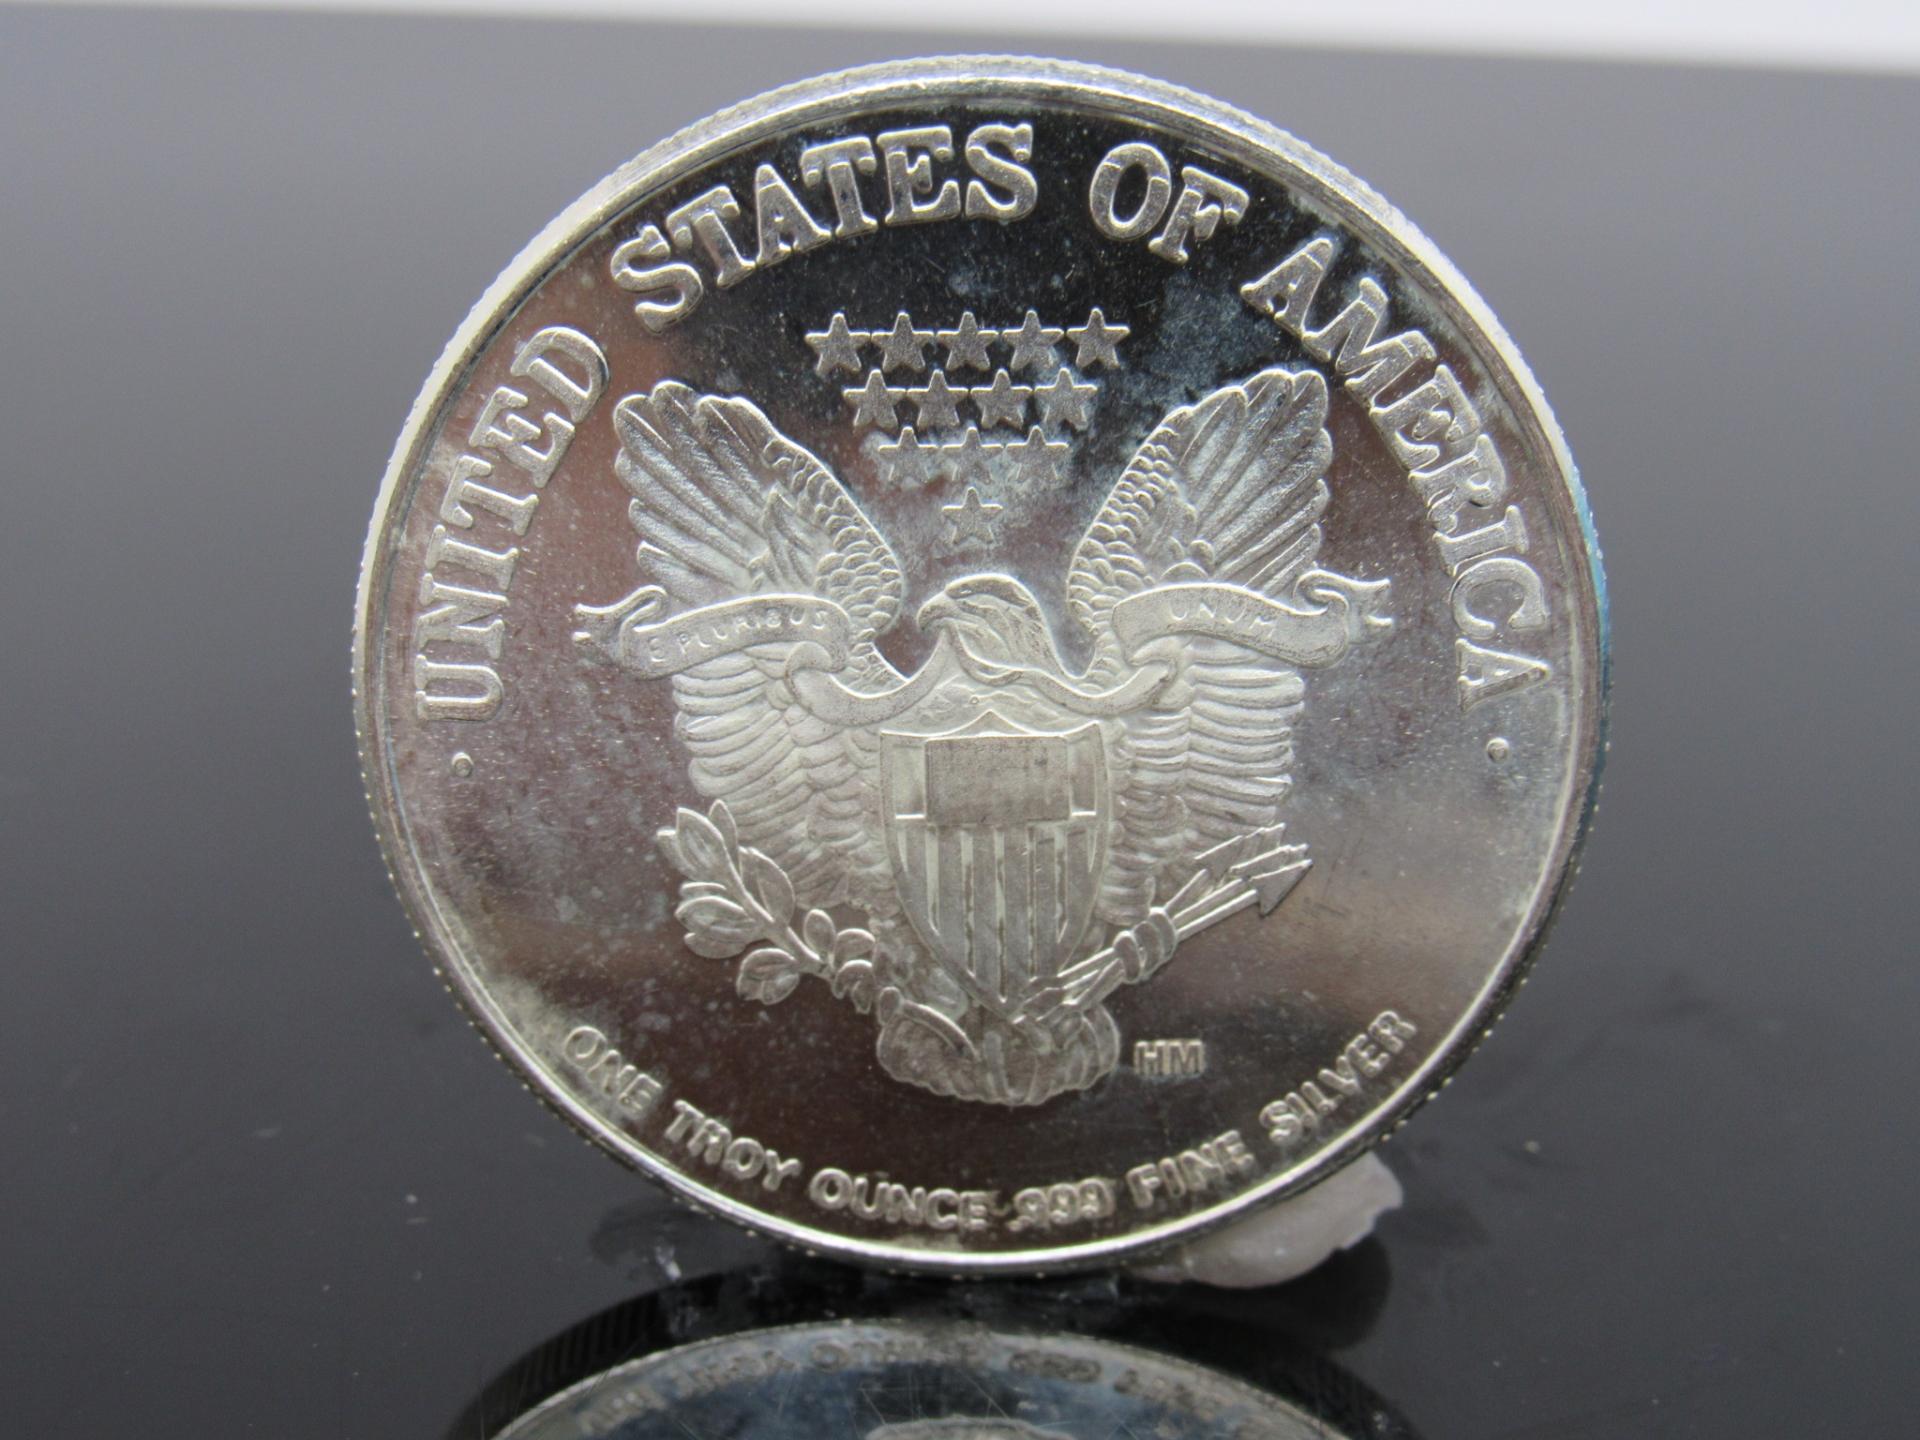 1 Troy Ounce Silver Liberty Dollar Round